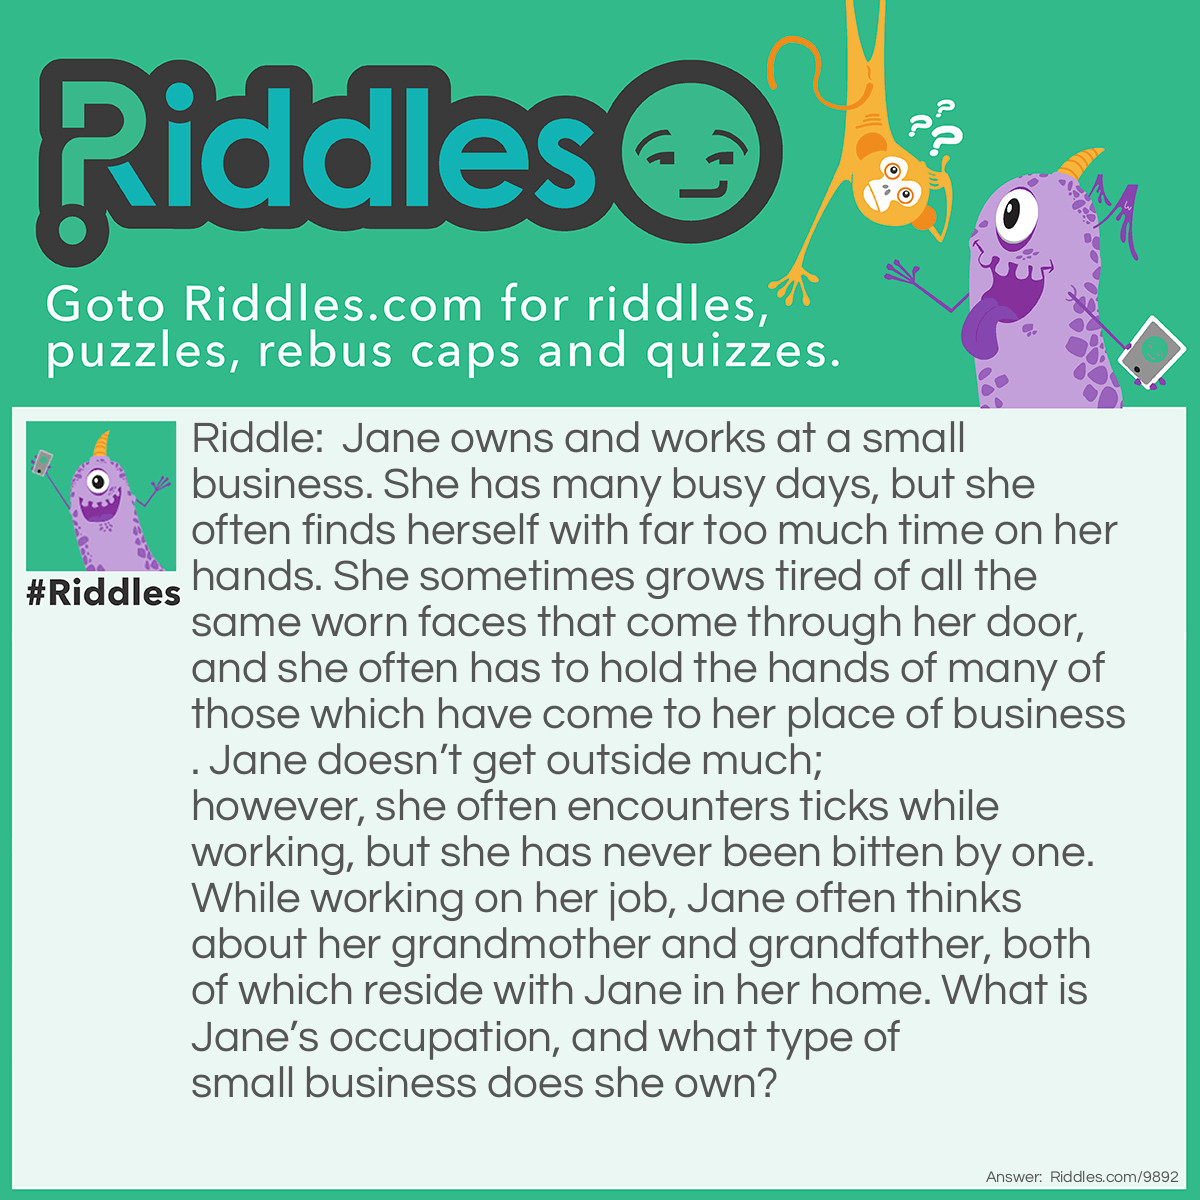 Riddle: Jane owns and works at a small business. She has many busy days, but she often finds herself with far too much time on her hands. She sometimes grows tired of all the same worn faces that come through her door, and she often has to hold the hands of many of those which have come to her place of business. Jane doesn't get outside much; however, she often encounters ticks while working, but she has never been bitten by one. While working on her job, Jane often thinks about her grandmother and grandfather, both of which reside with Jane in her home. What is Jane's occupation, and what type of small business does she own? Answer: Jane is a clock repairer who owns her own clock-repair shop. By the way, Jane has two beautiful grandmother and grandfather clocks in her home which keep excellent time, thanks to Jane.